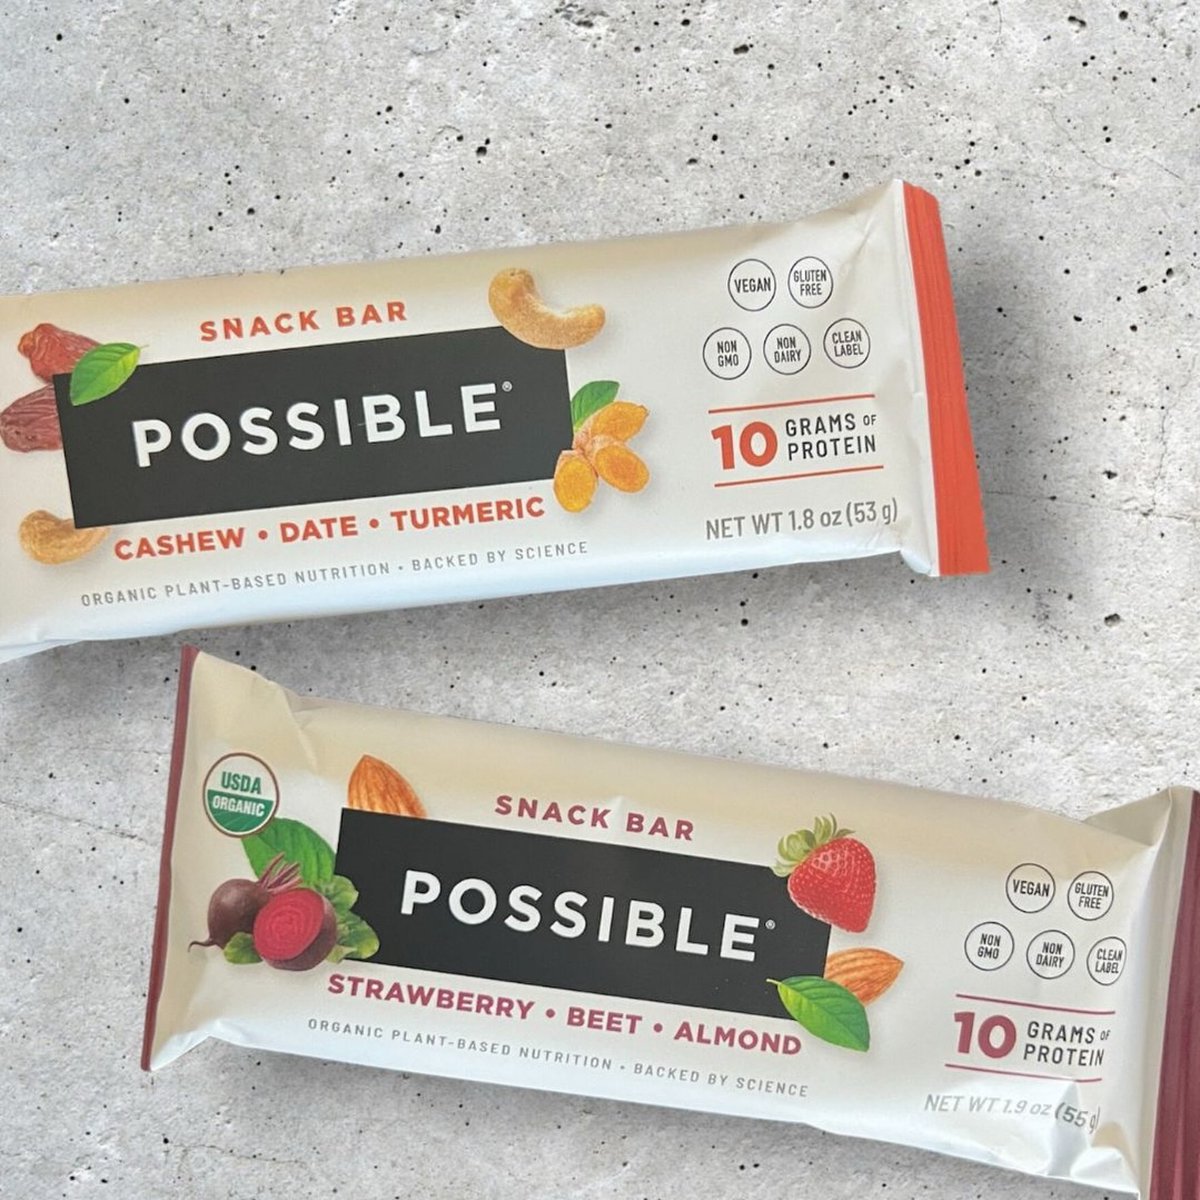 Can’t choose just one flavor? No problem! Shop our Bundle Pack featuring both Strawberry Beet Almond and Cashew Date Turmeric Snack Bars. Enjoy real-food, real-taste goodness with POSSIBLE! 🍫

#mypossiblefoods #fuelyourbody #snack #snacktime #nutrition #energy #protein